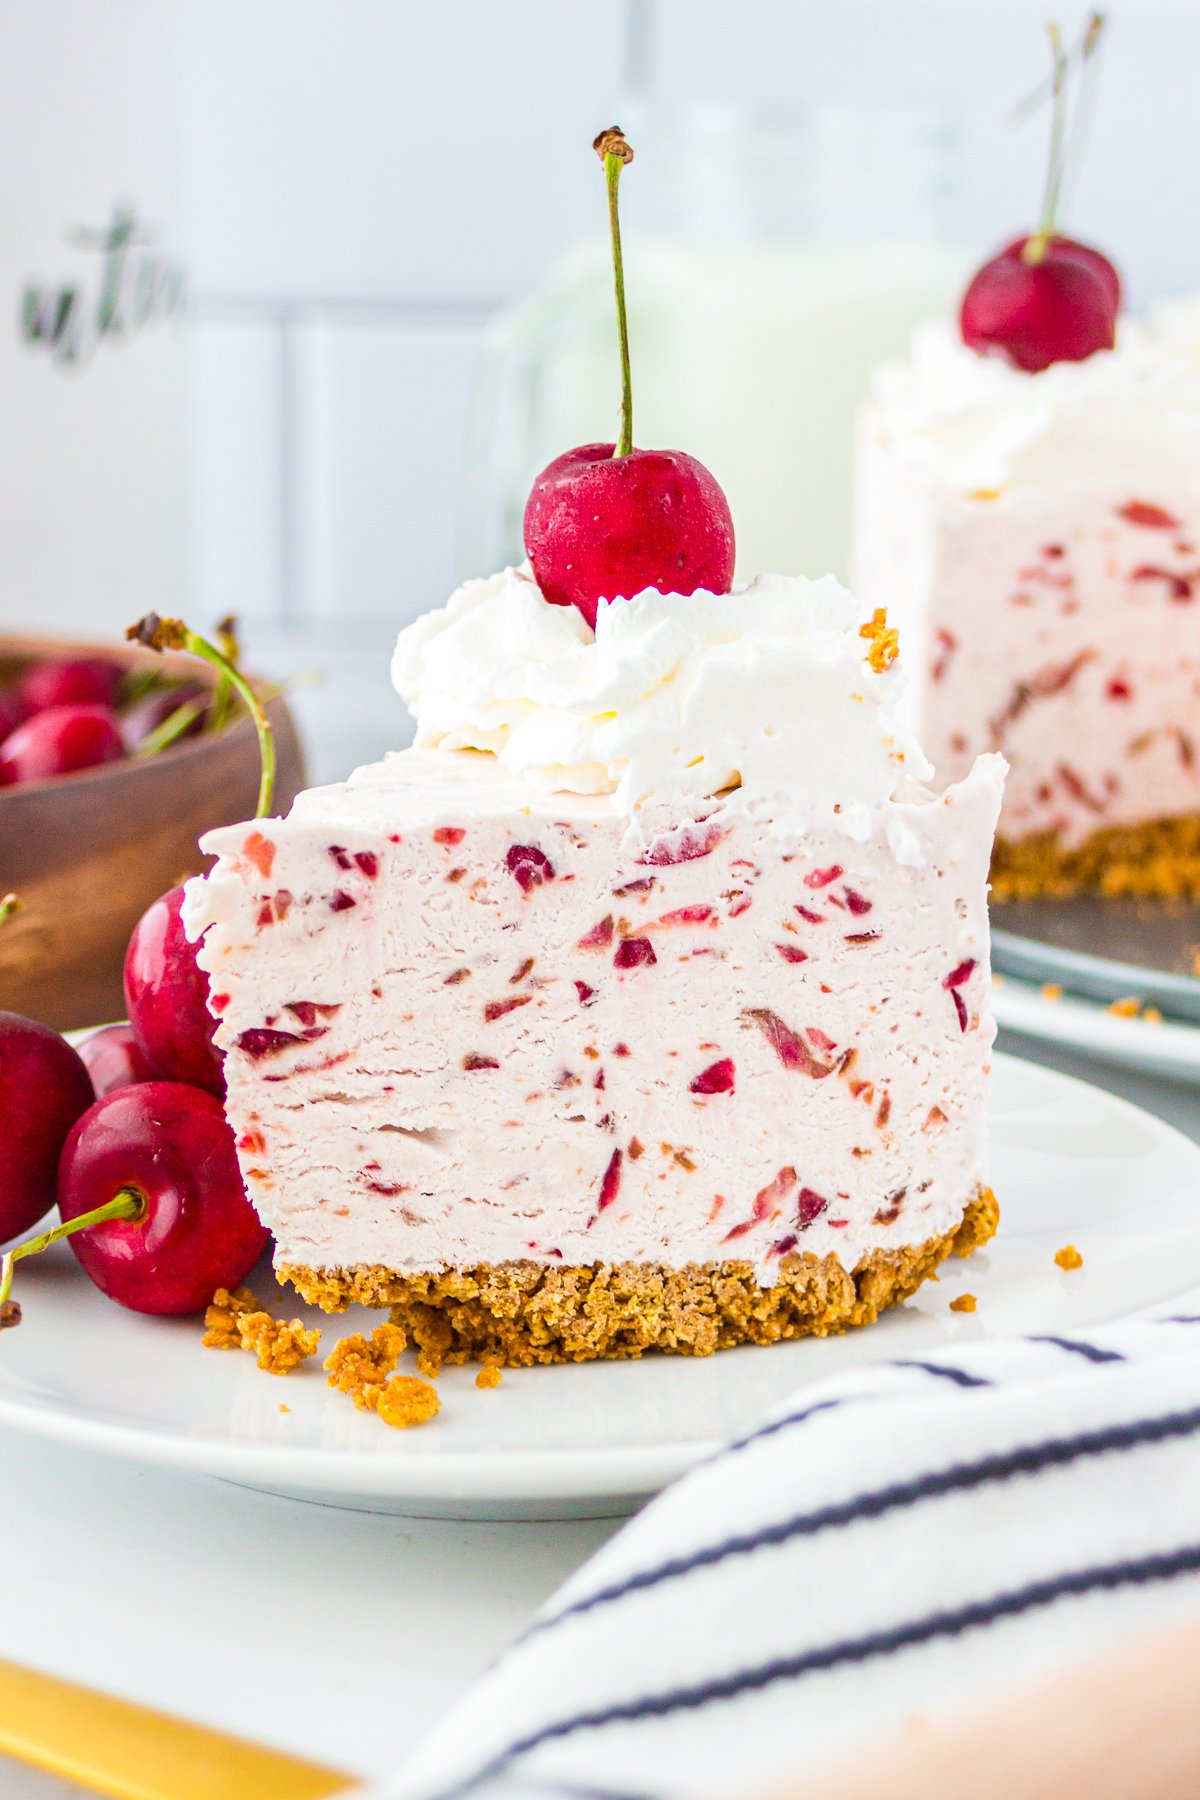 Slice of No Bake Cherry Cheesecake on white plate topped with whipped cream and a cherry